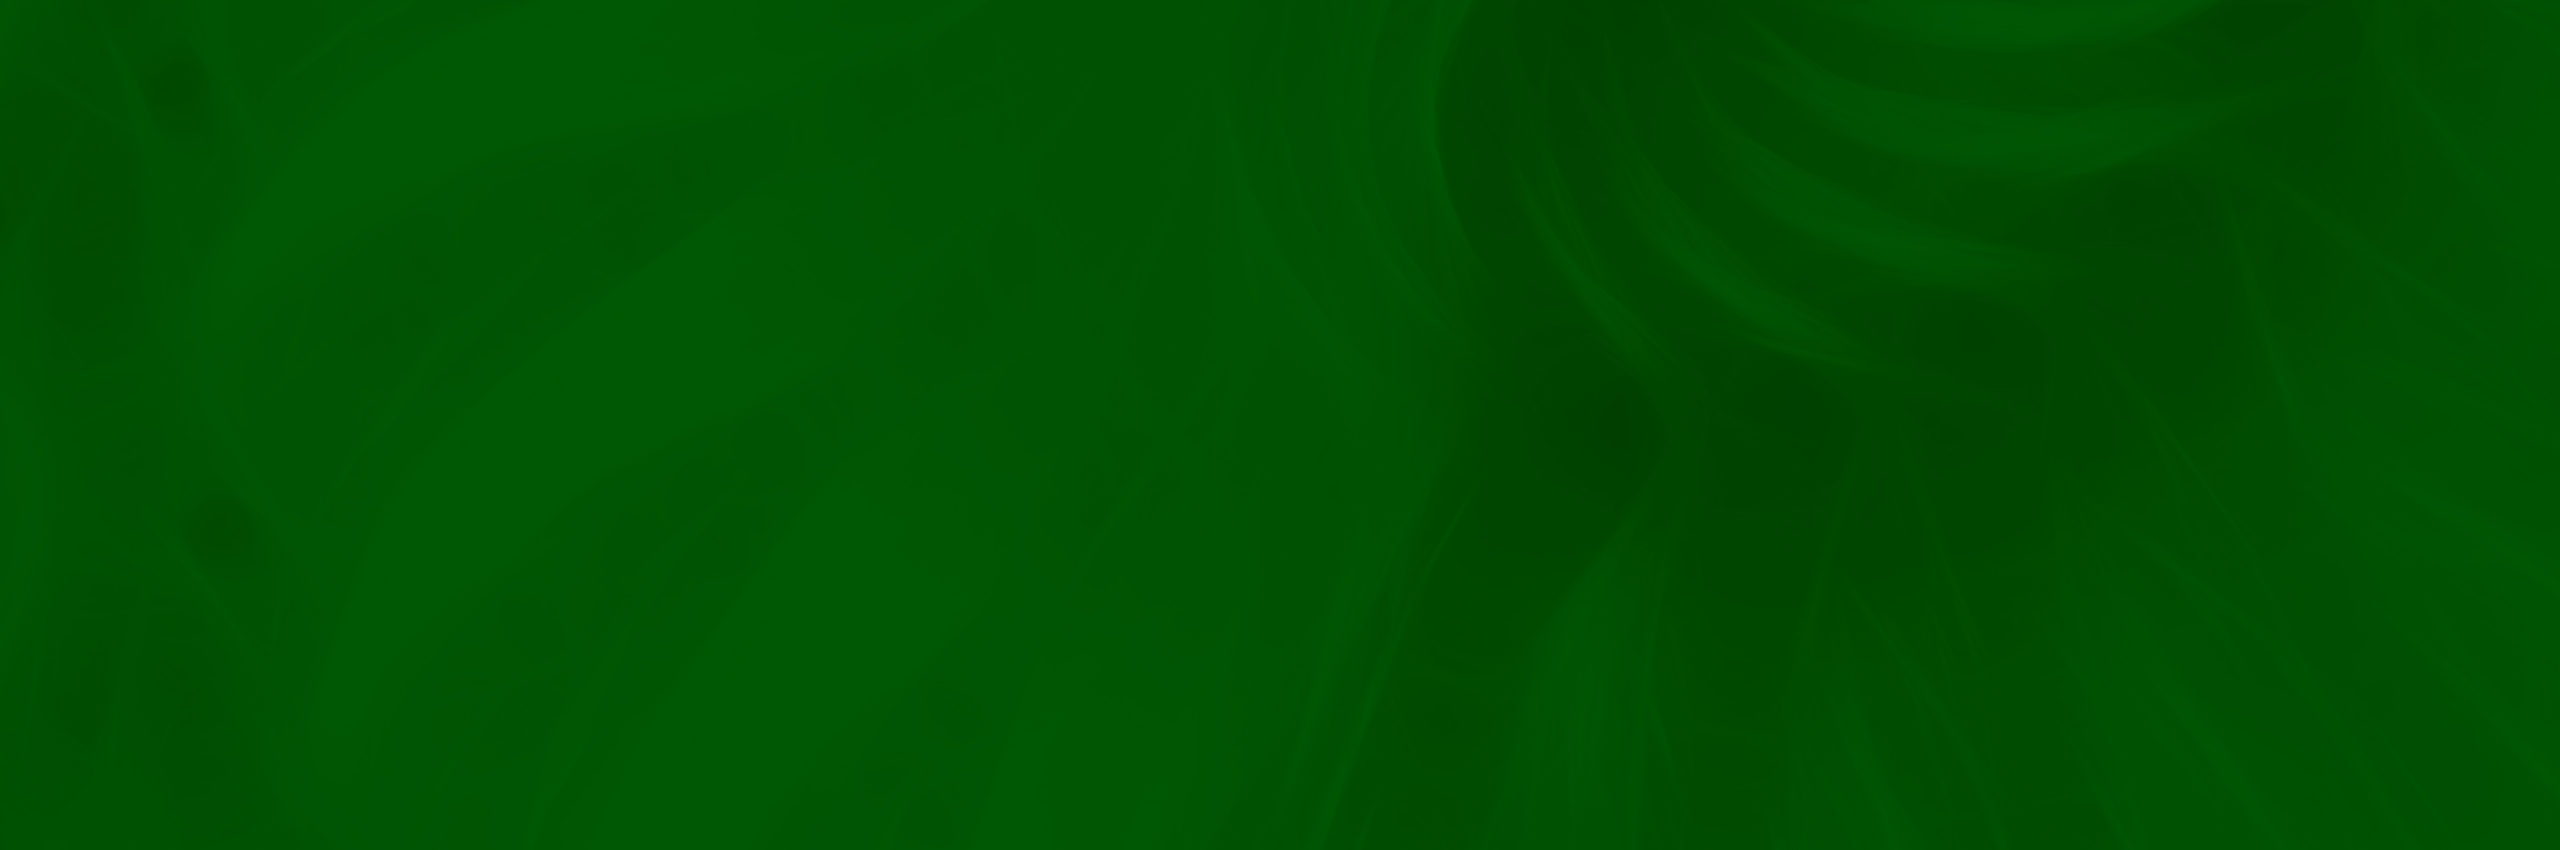 Green Background Image with textured swirl